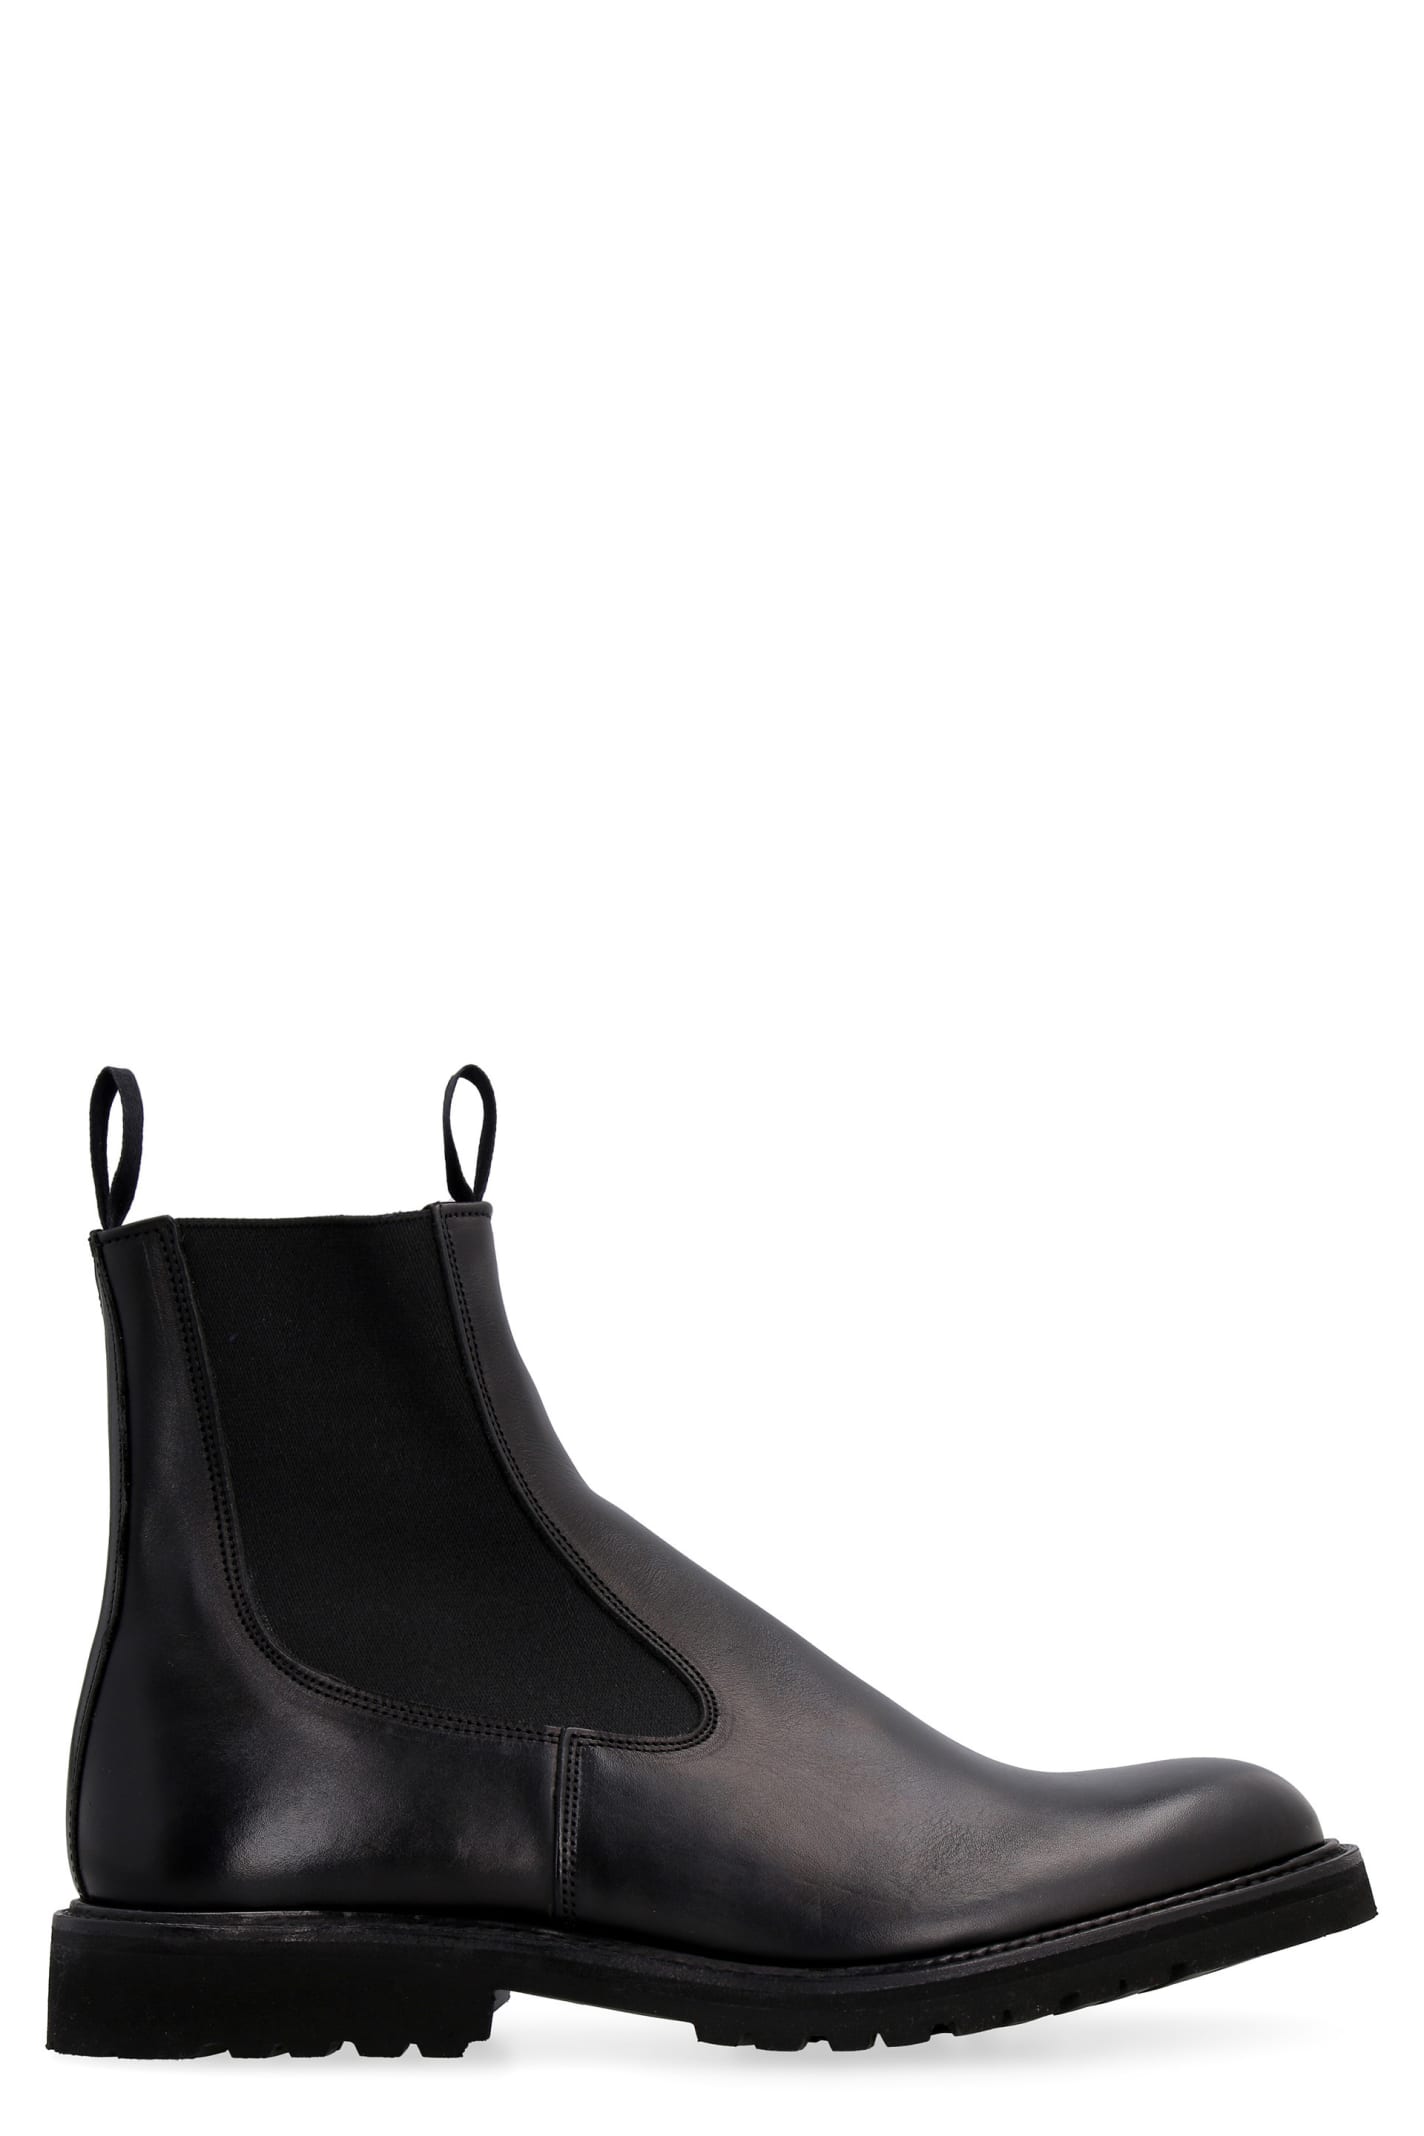 Trickers Stephen Leather Chelsea-boots